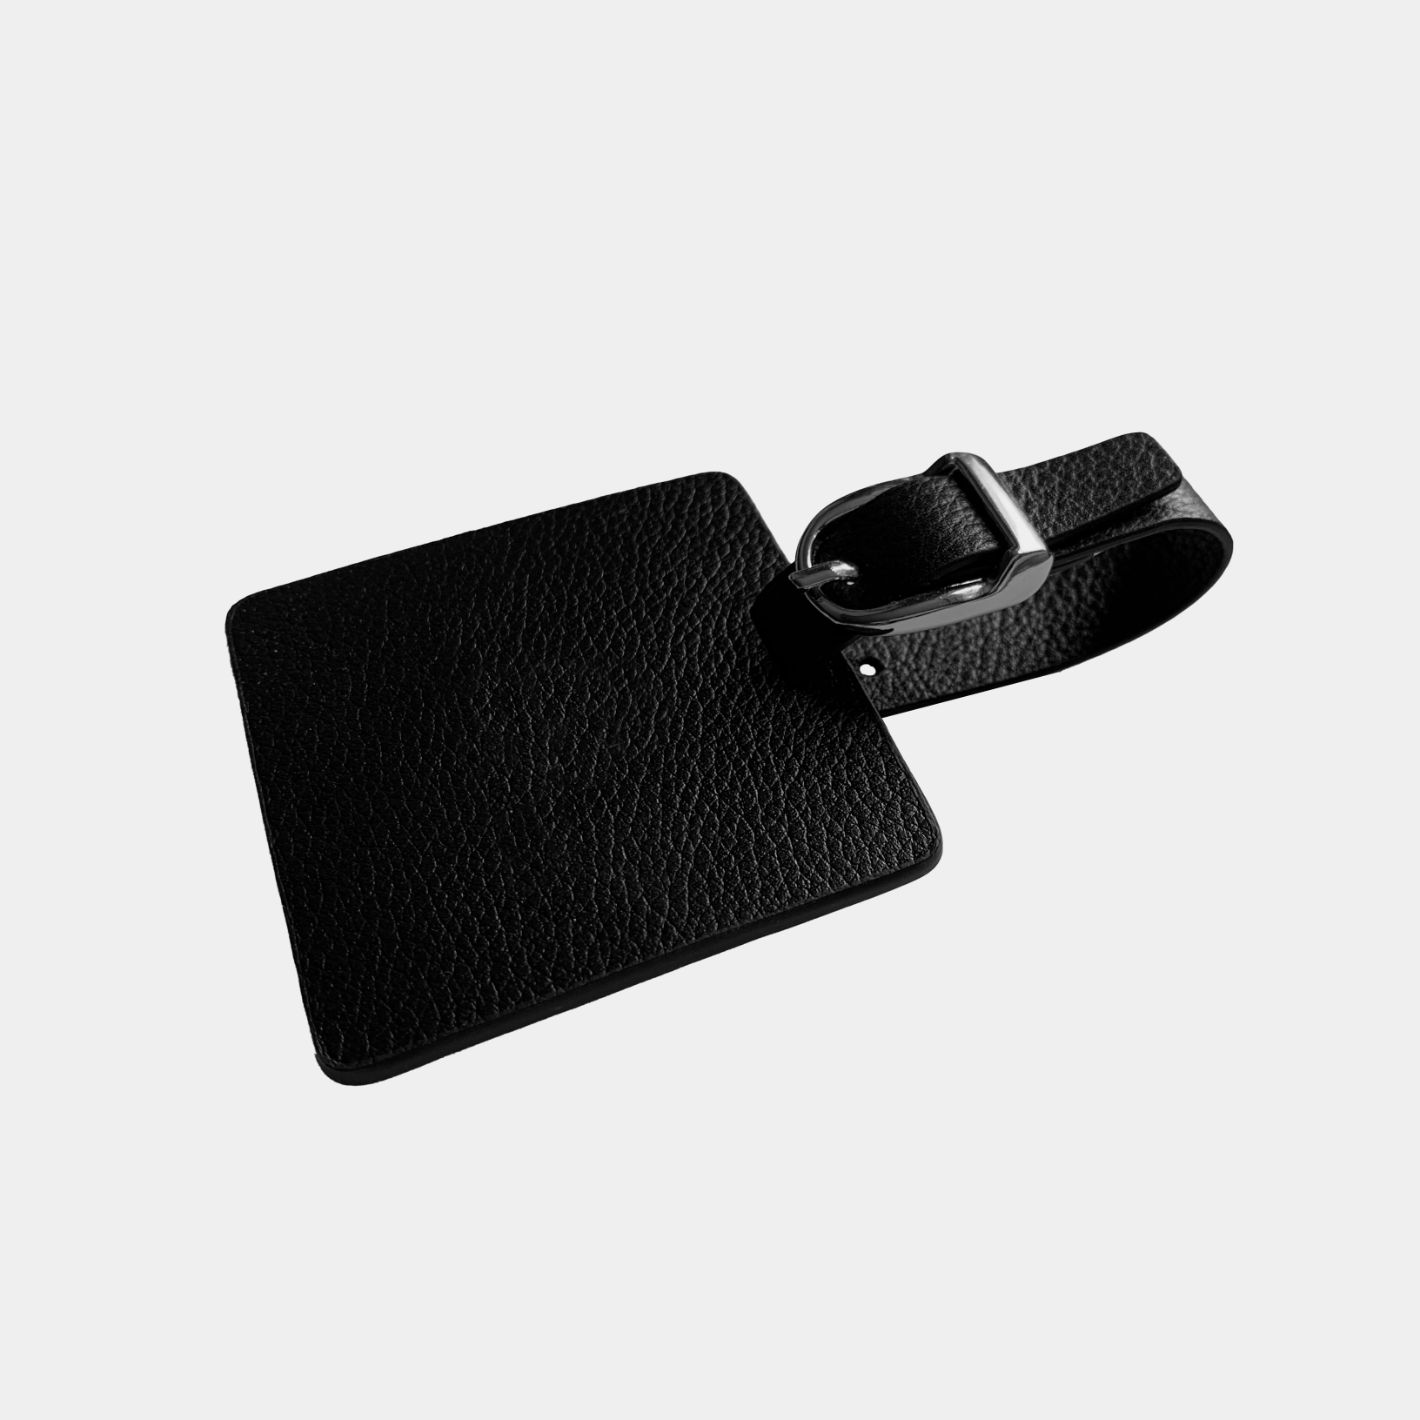 A leather bag tag designed for marketing on the move, gift a branded bag tag to your members and clients.